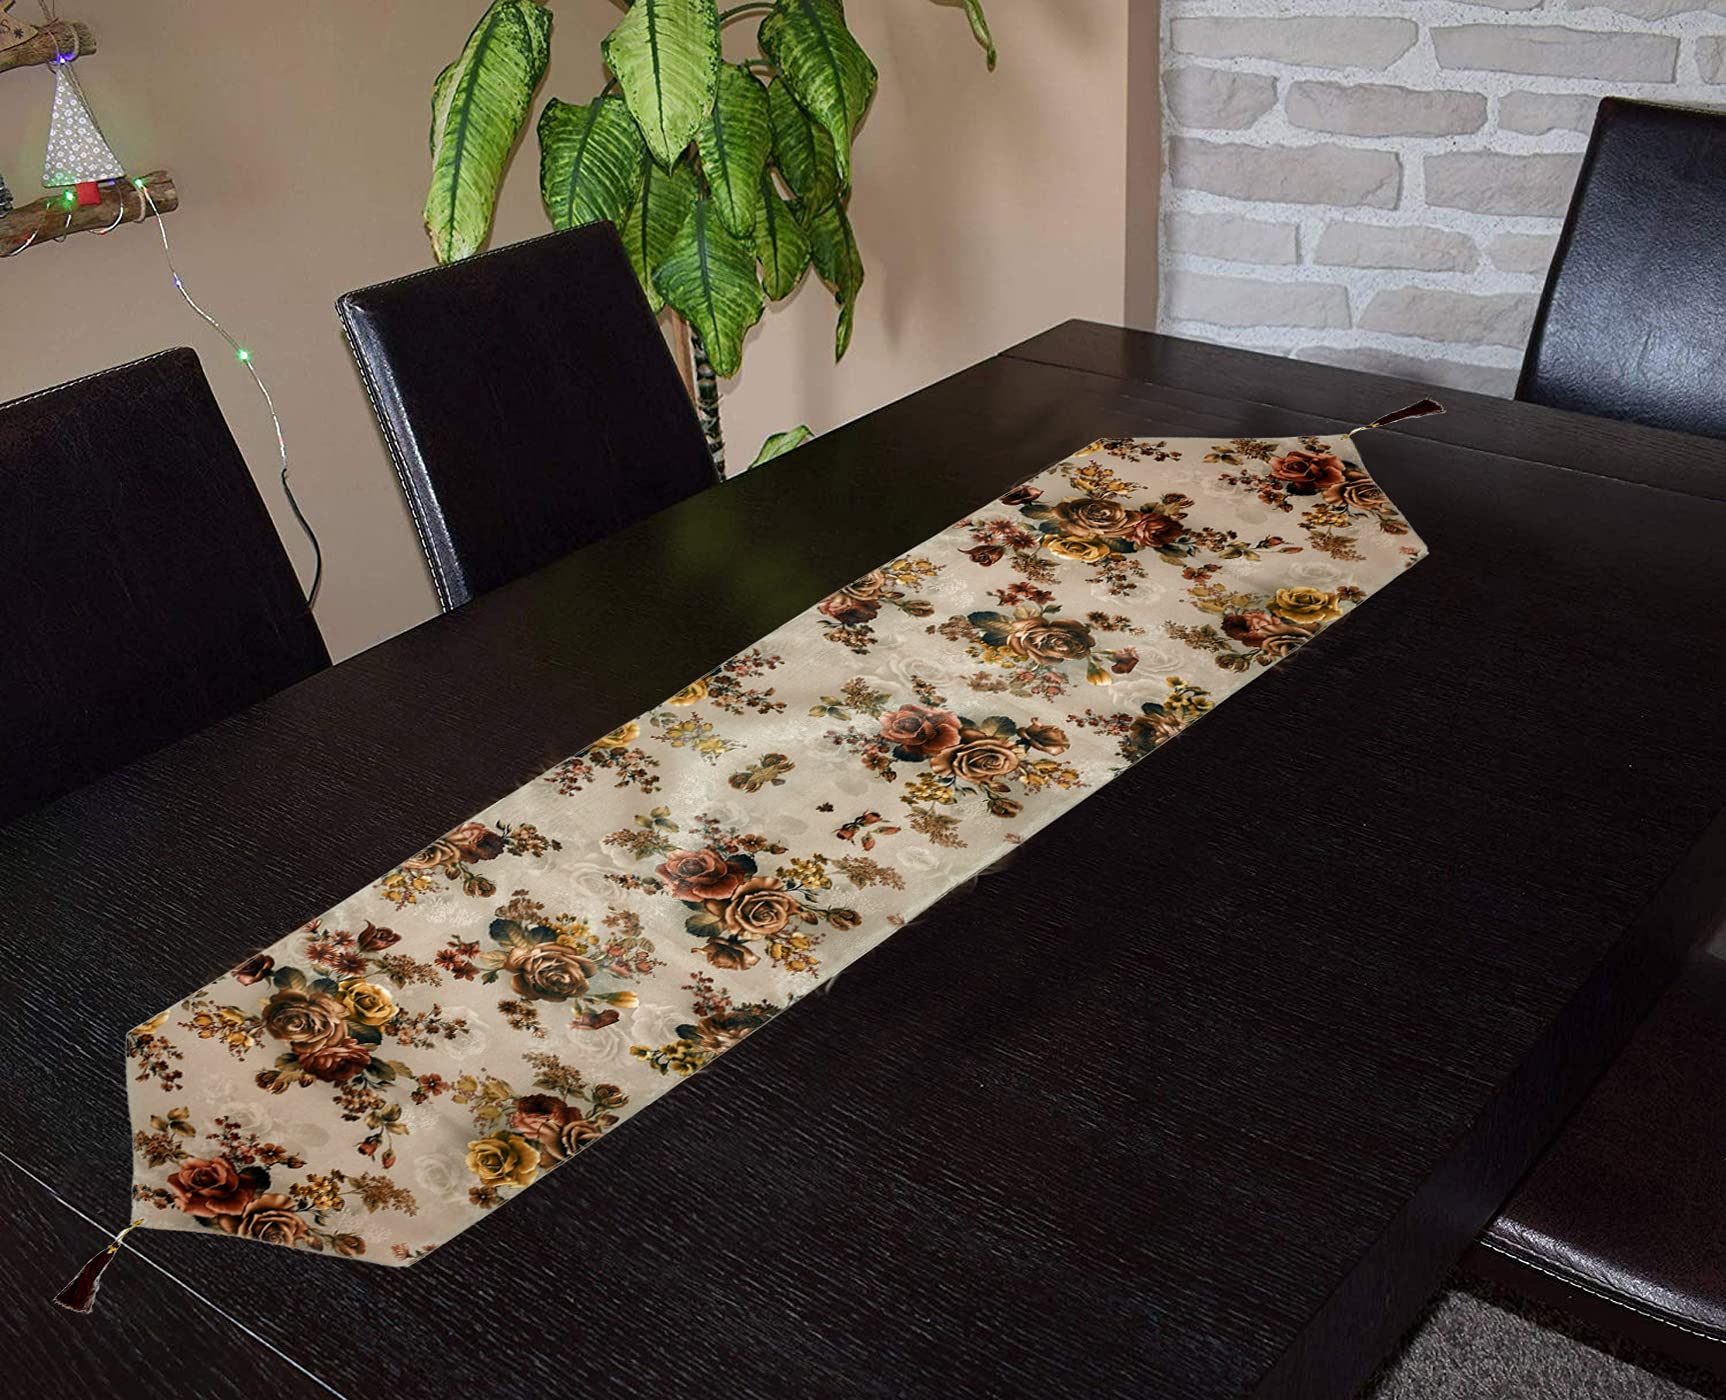 Kuber Industries Flower Design Cotton Table Runner|Patios for Family Dinner|Office/Kitchen Table|Indoor or Outdoor Parties & Everyday Use|Size 188 x 33 CM(Brown)